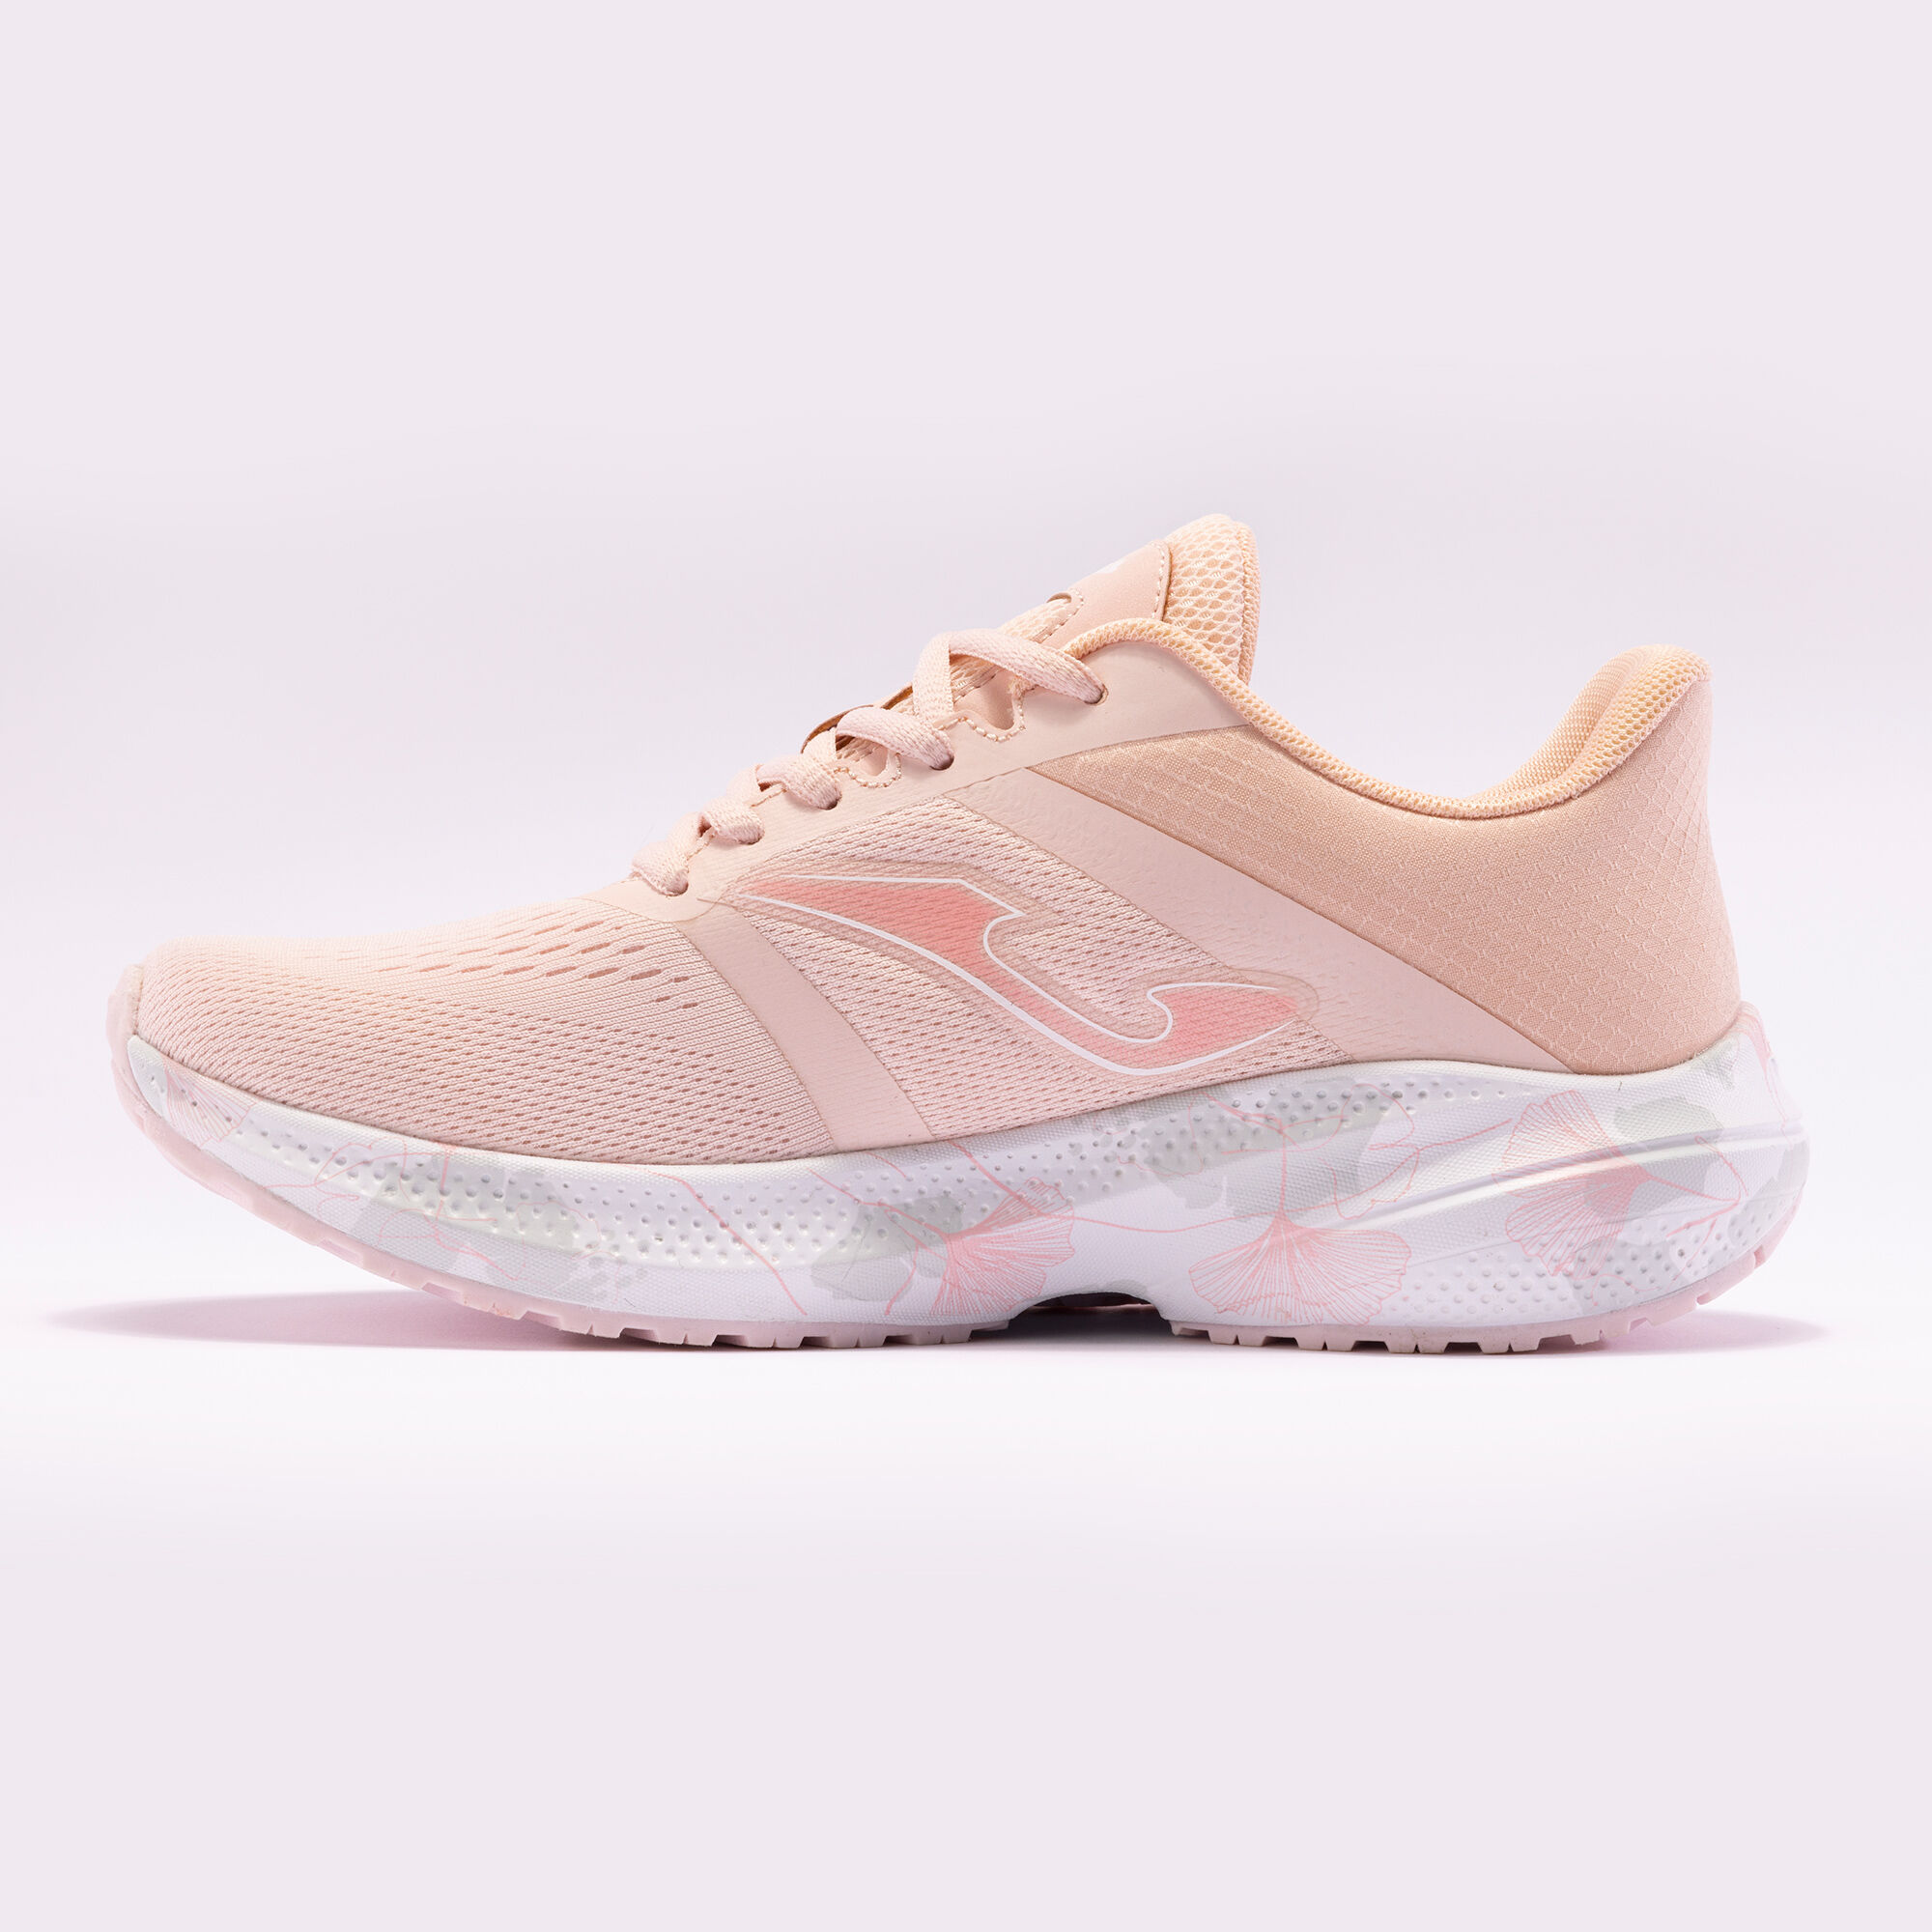 Chaussures running Elite Lady 24 femme rose